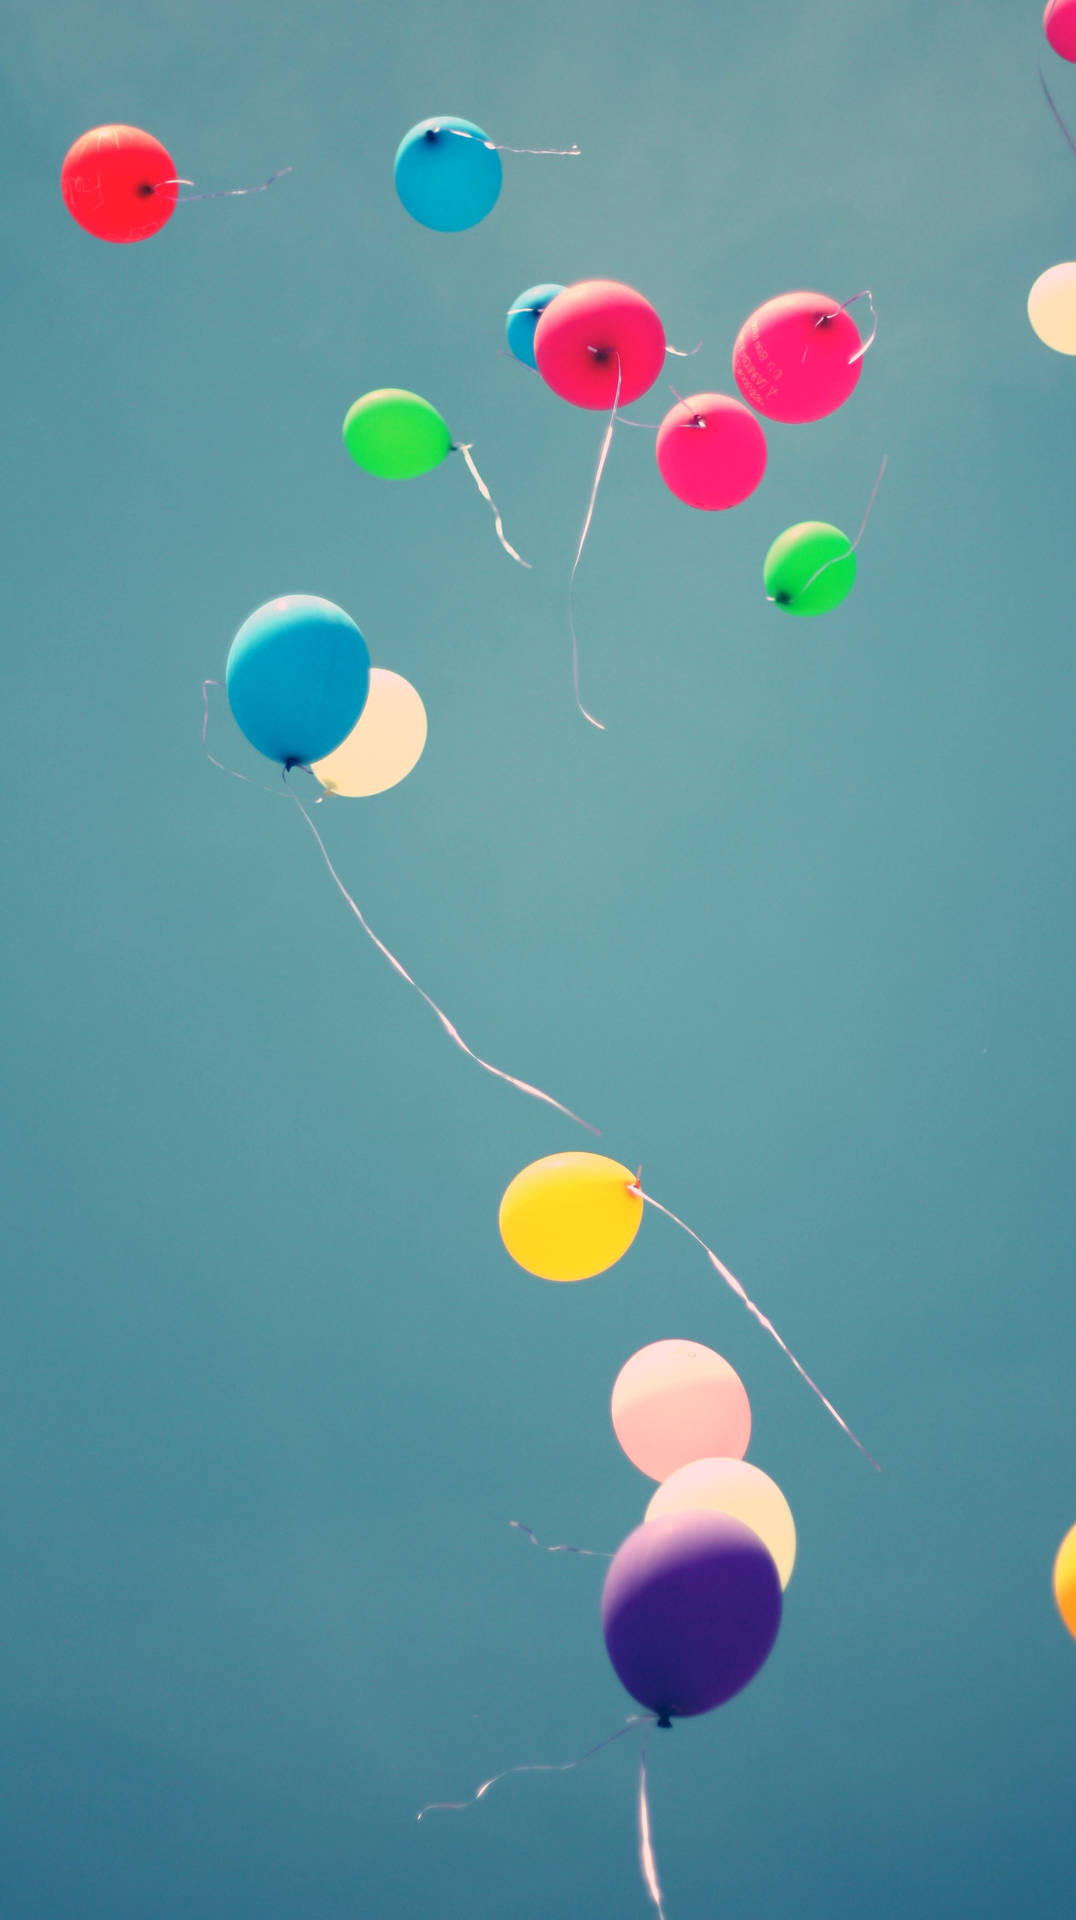 Colorful Balloons At Dark Blue Sky Background